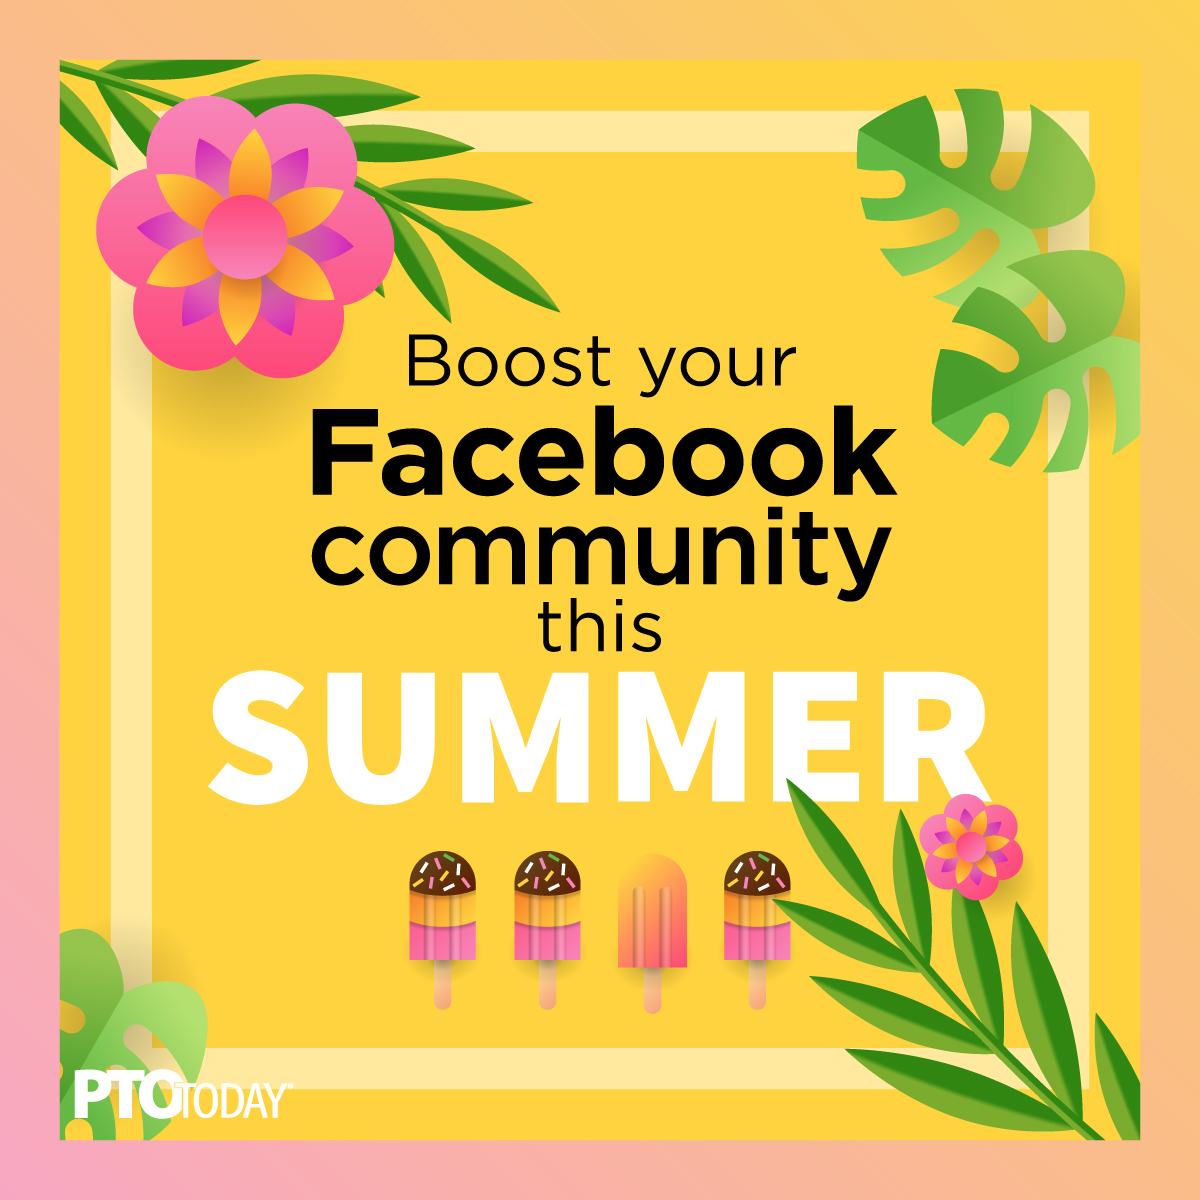 How to use Facebook during summer break